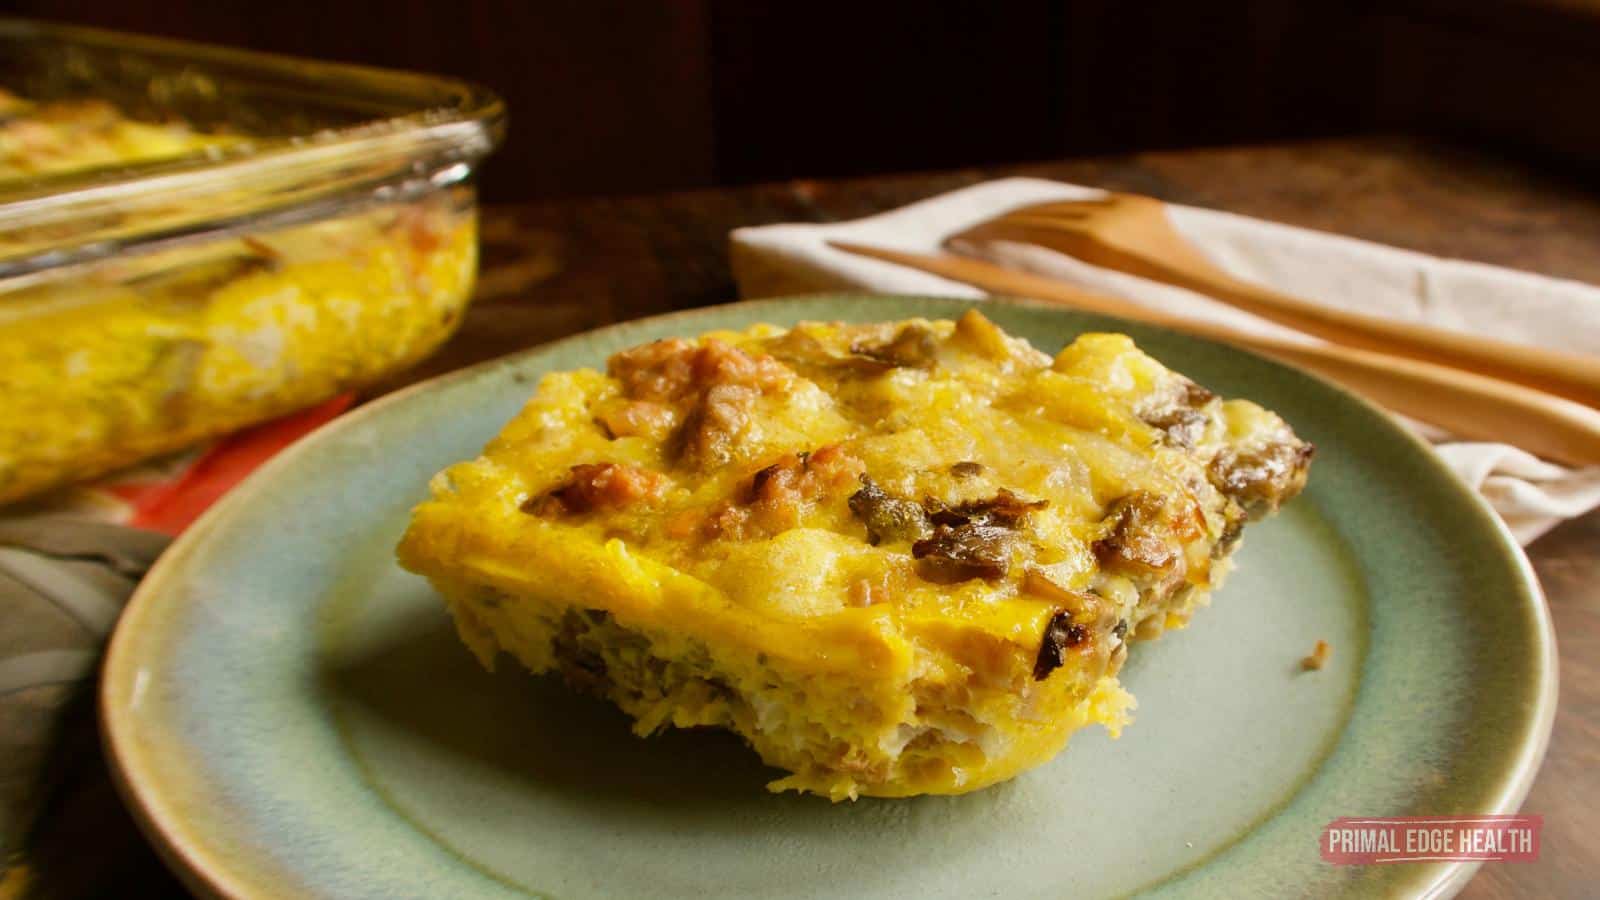 <p>Wake up to the aromatic embrace of this cheesy breakfast casserole that’s perfect for mornings when comfort is your priority. With layers of eggs, cheese, and your favorite breakfast ingredients, this dish offers warmth and satisfaction in every mouthful. Indulge in cheesy goodness from the first bite.<br><strong>Get the Recipe: </strong><a href="https://www.primaledgehealth.com/keto-breakfast-casserole/?utm_source=msn&utm_medium=page&utm_campaign=msn">Cheesy Breakfast Casserole</a></p>